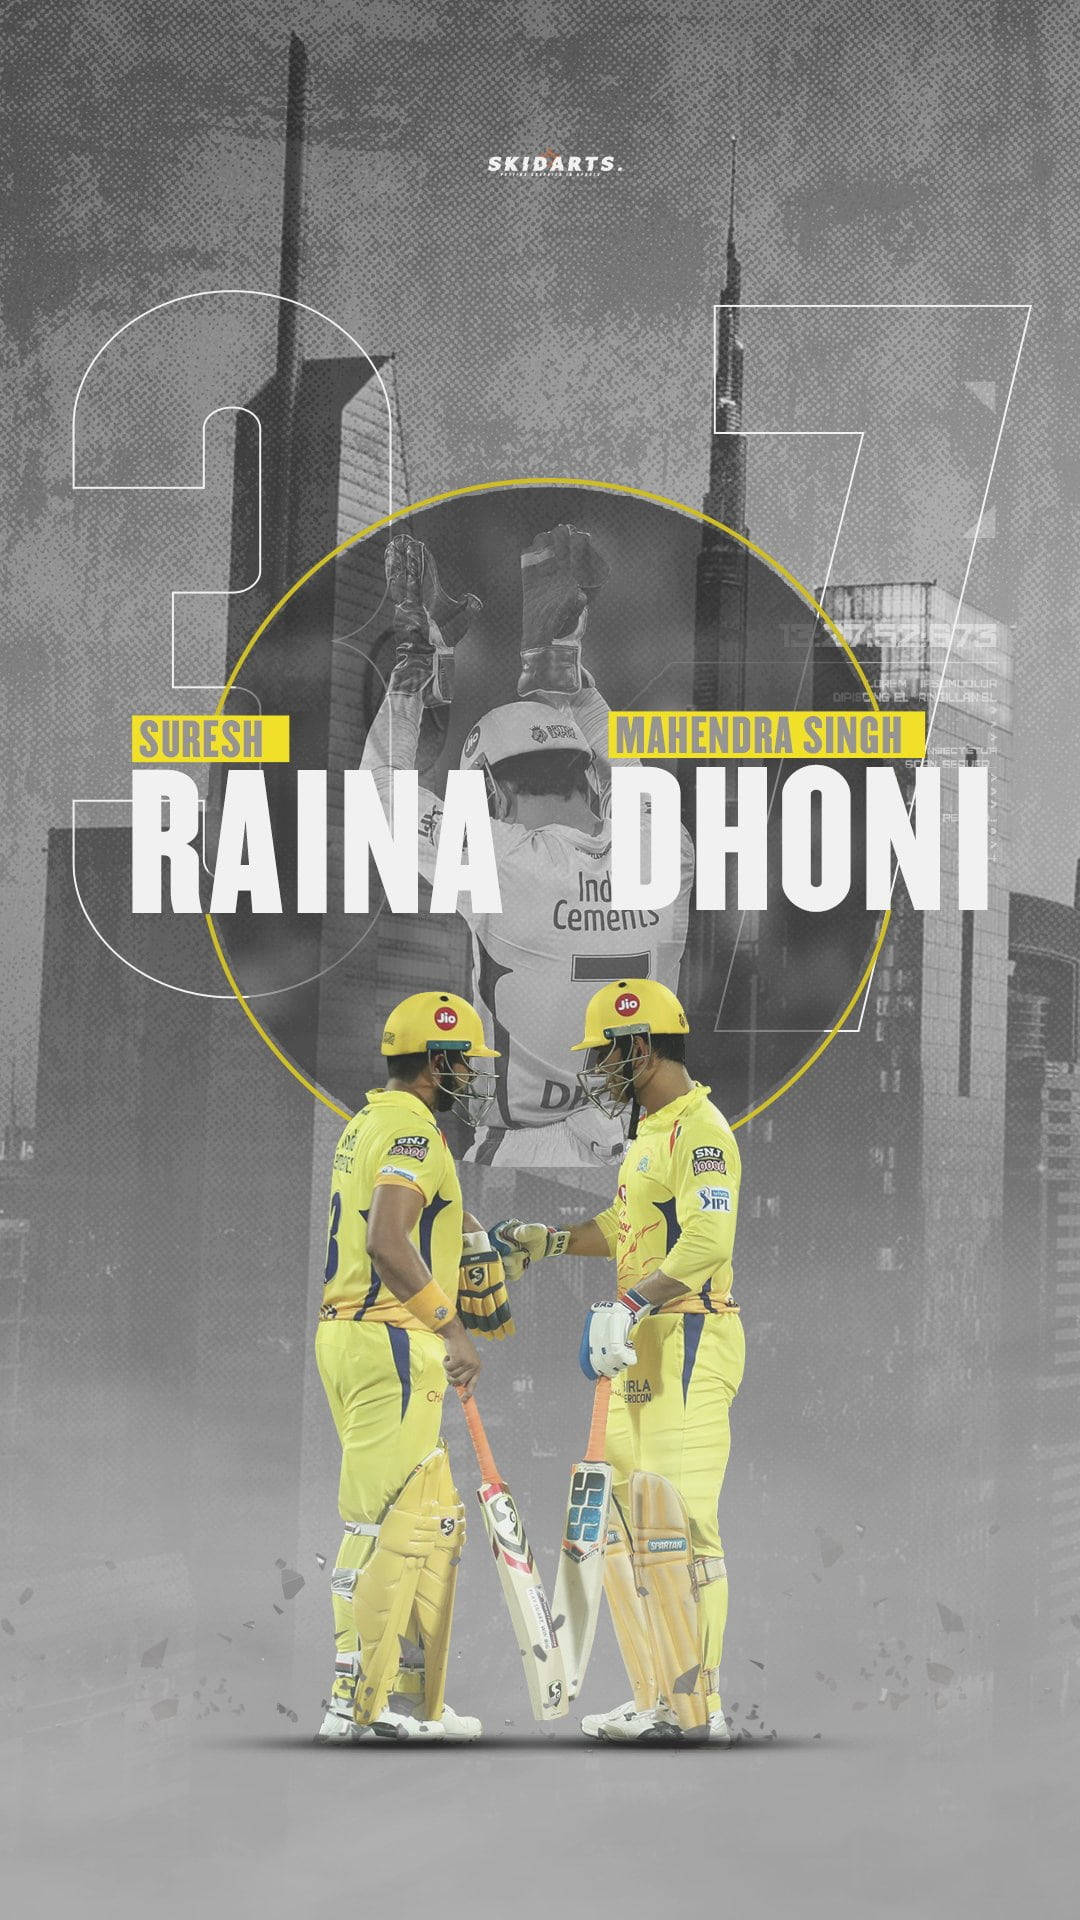 100+] Dhoni 7 Wallpapers | Wallpapers.com